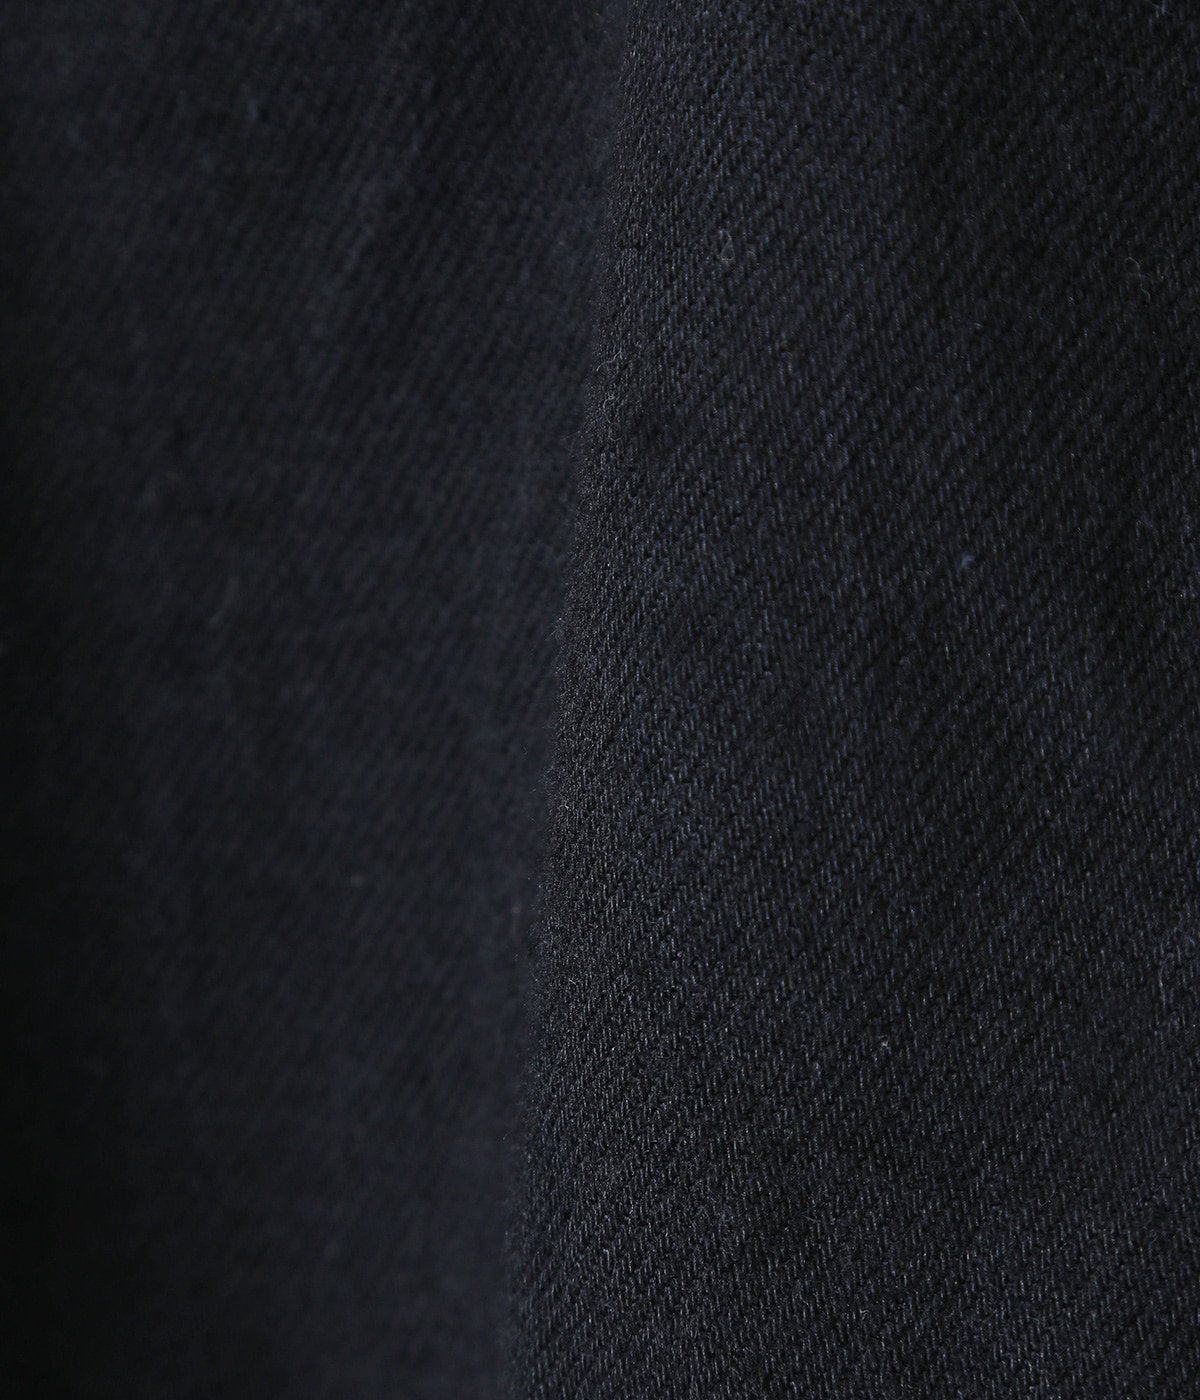 RECYCLED WASTE SUVIN COTTON YARN 11oz. DENIM PLEATED BLOUSE